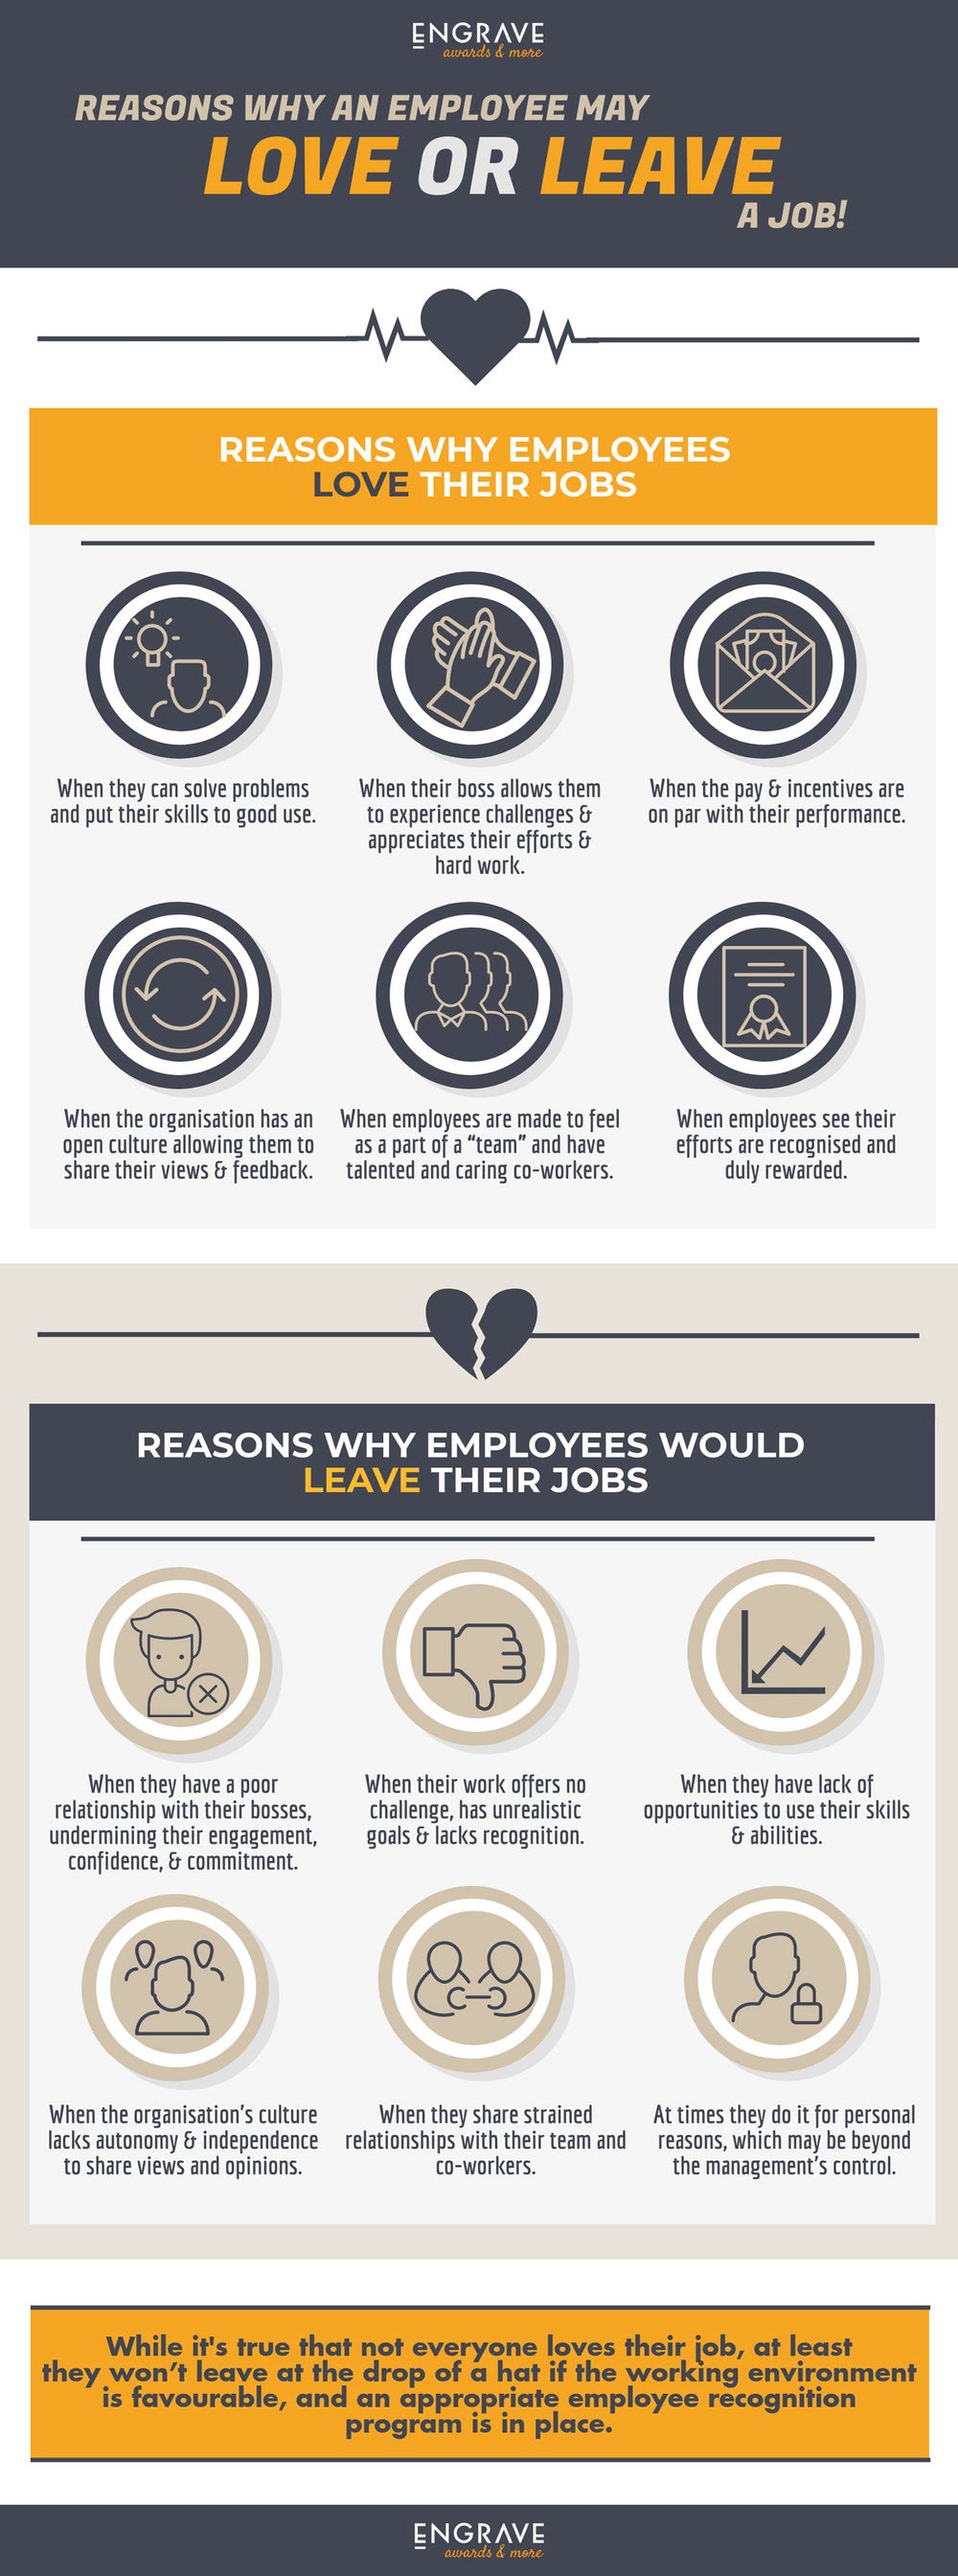 Reasons Why An Employee May Love Or Leave A Job!